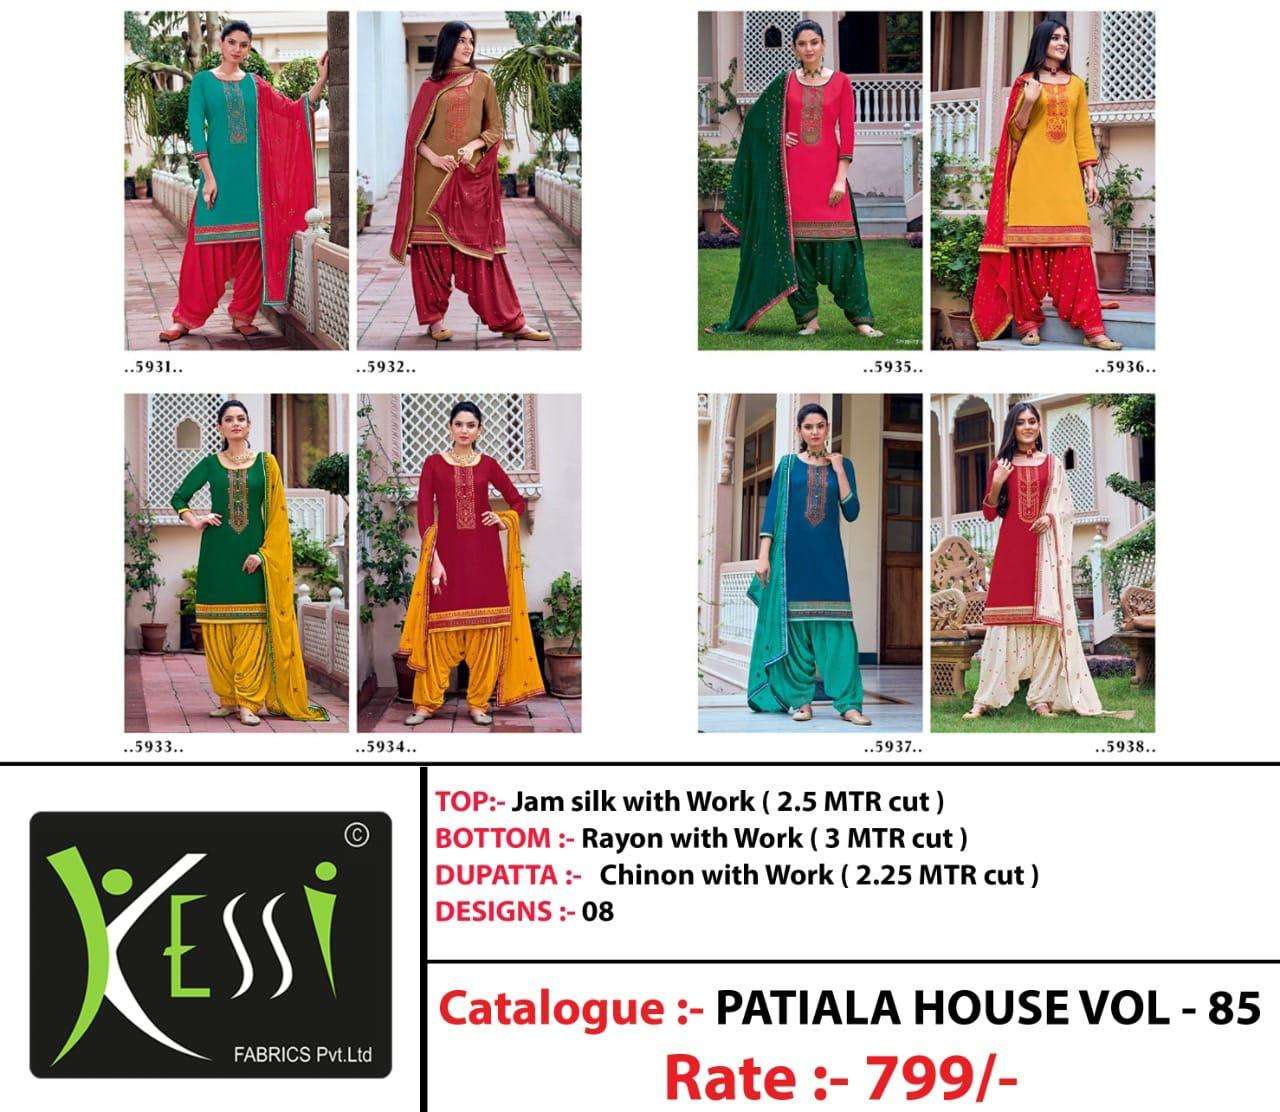 PATIALA HOUSE VOL-85 BY KESSI FABRICS 5931 TO 5938 SERIES DESIGNER SUITS STYLISH DESIGNER COLORFUL FANCY BEAUTIFUL PARTY WEAR & ETHNIC WEAR JAM SILK WITH WORK DRESSES AT WHOLESALE PRICE